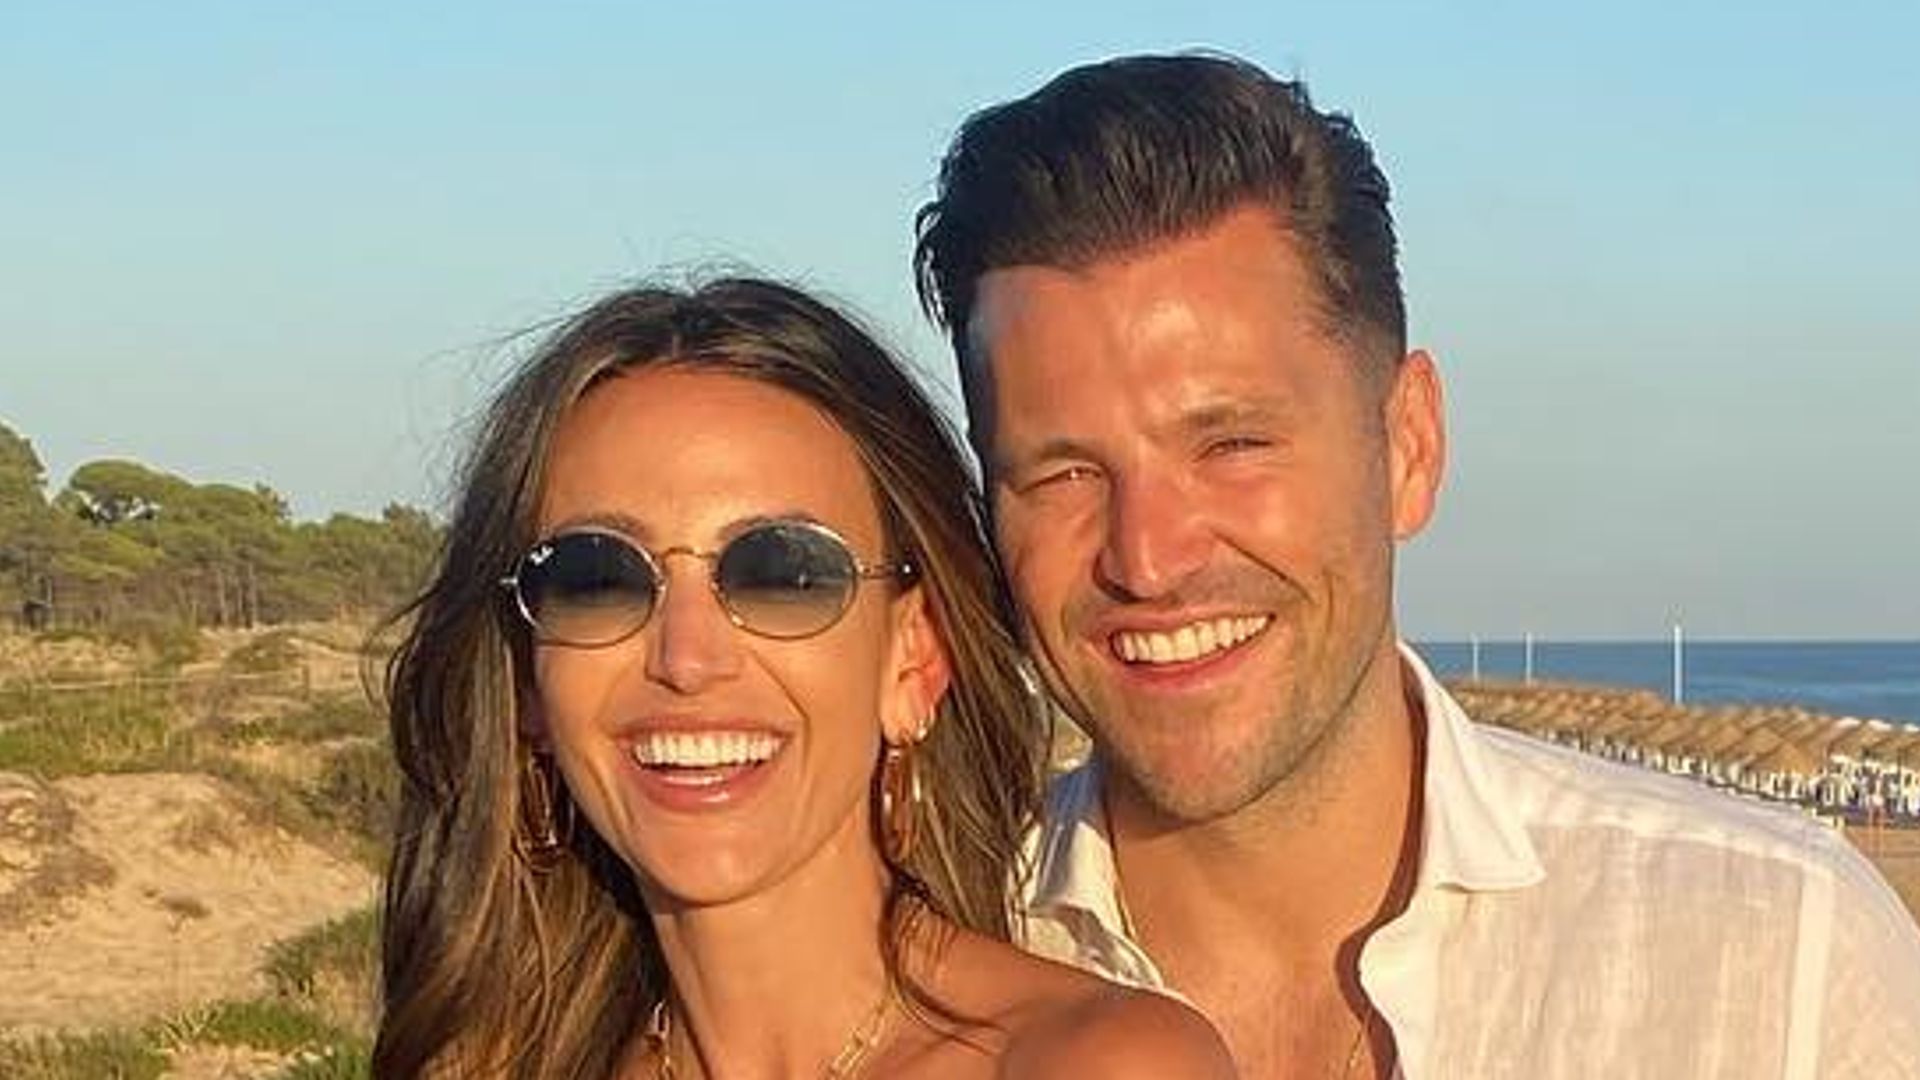 Michelle Keegan and Mark Wright look so loved-up in new photos from Australia trip